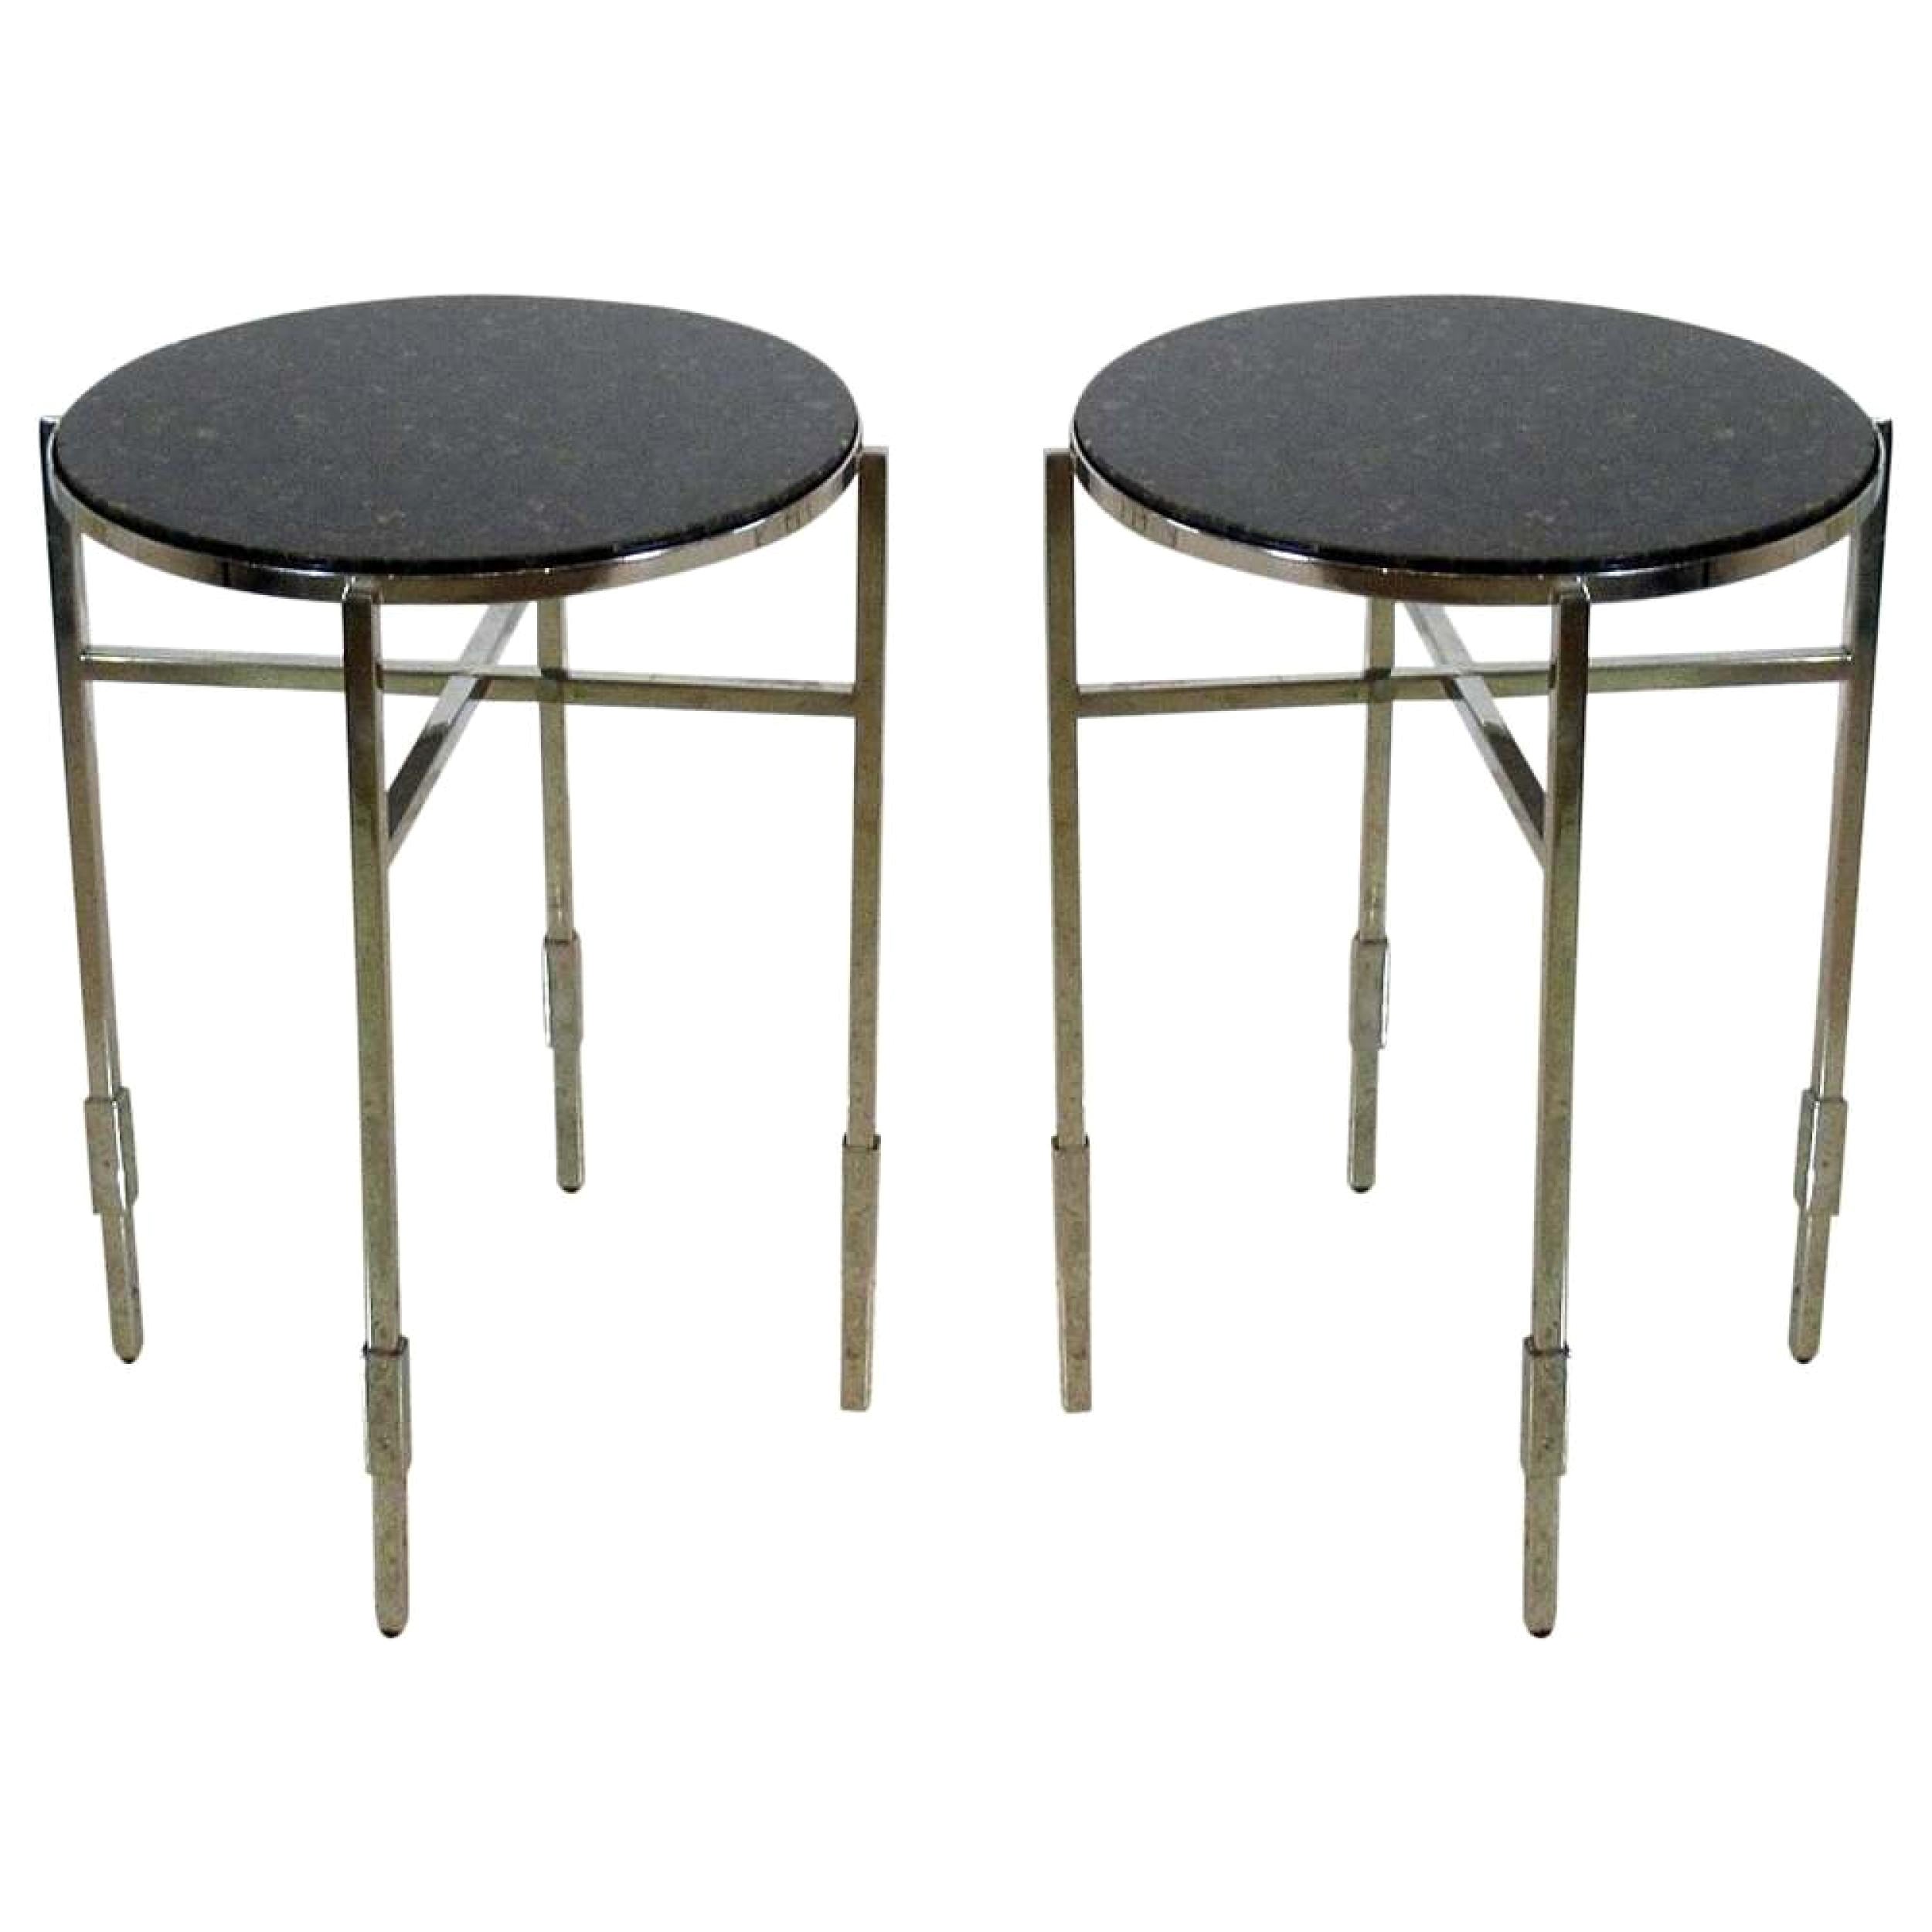 Pair of Michael Graves American Modern Granite & Polished Chrome End/Side Tables For Sale